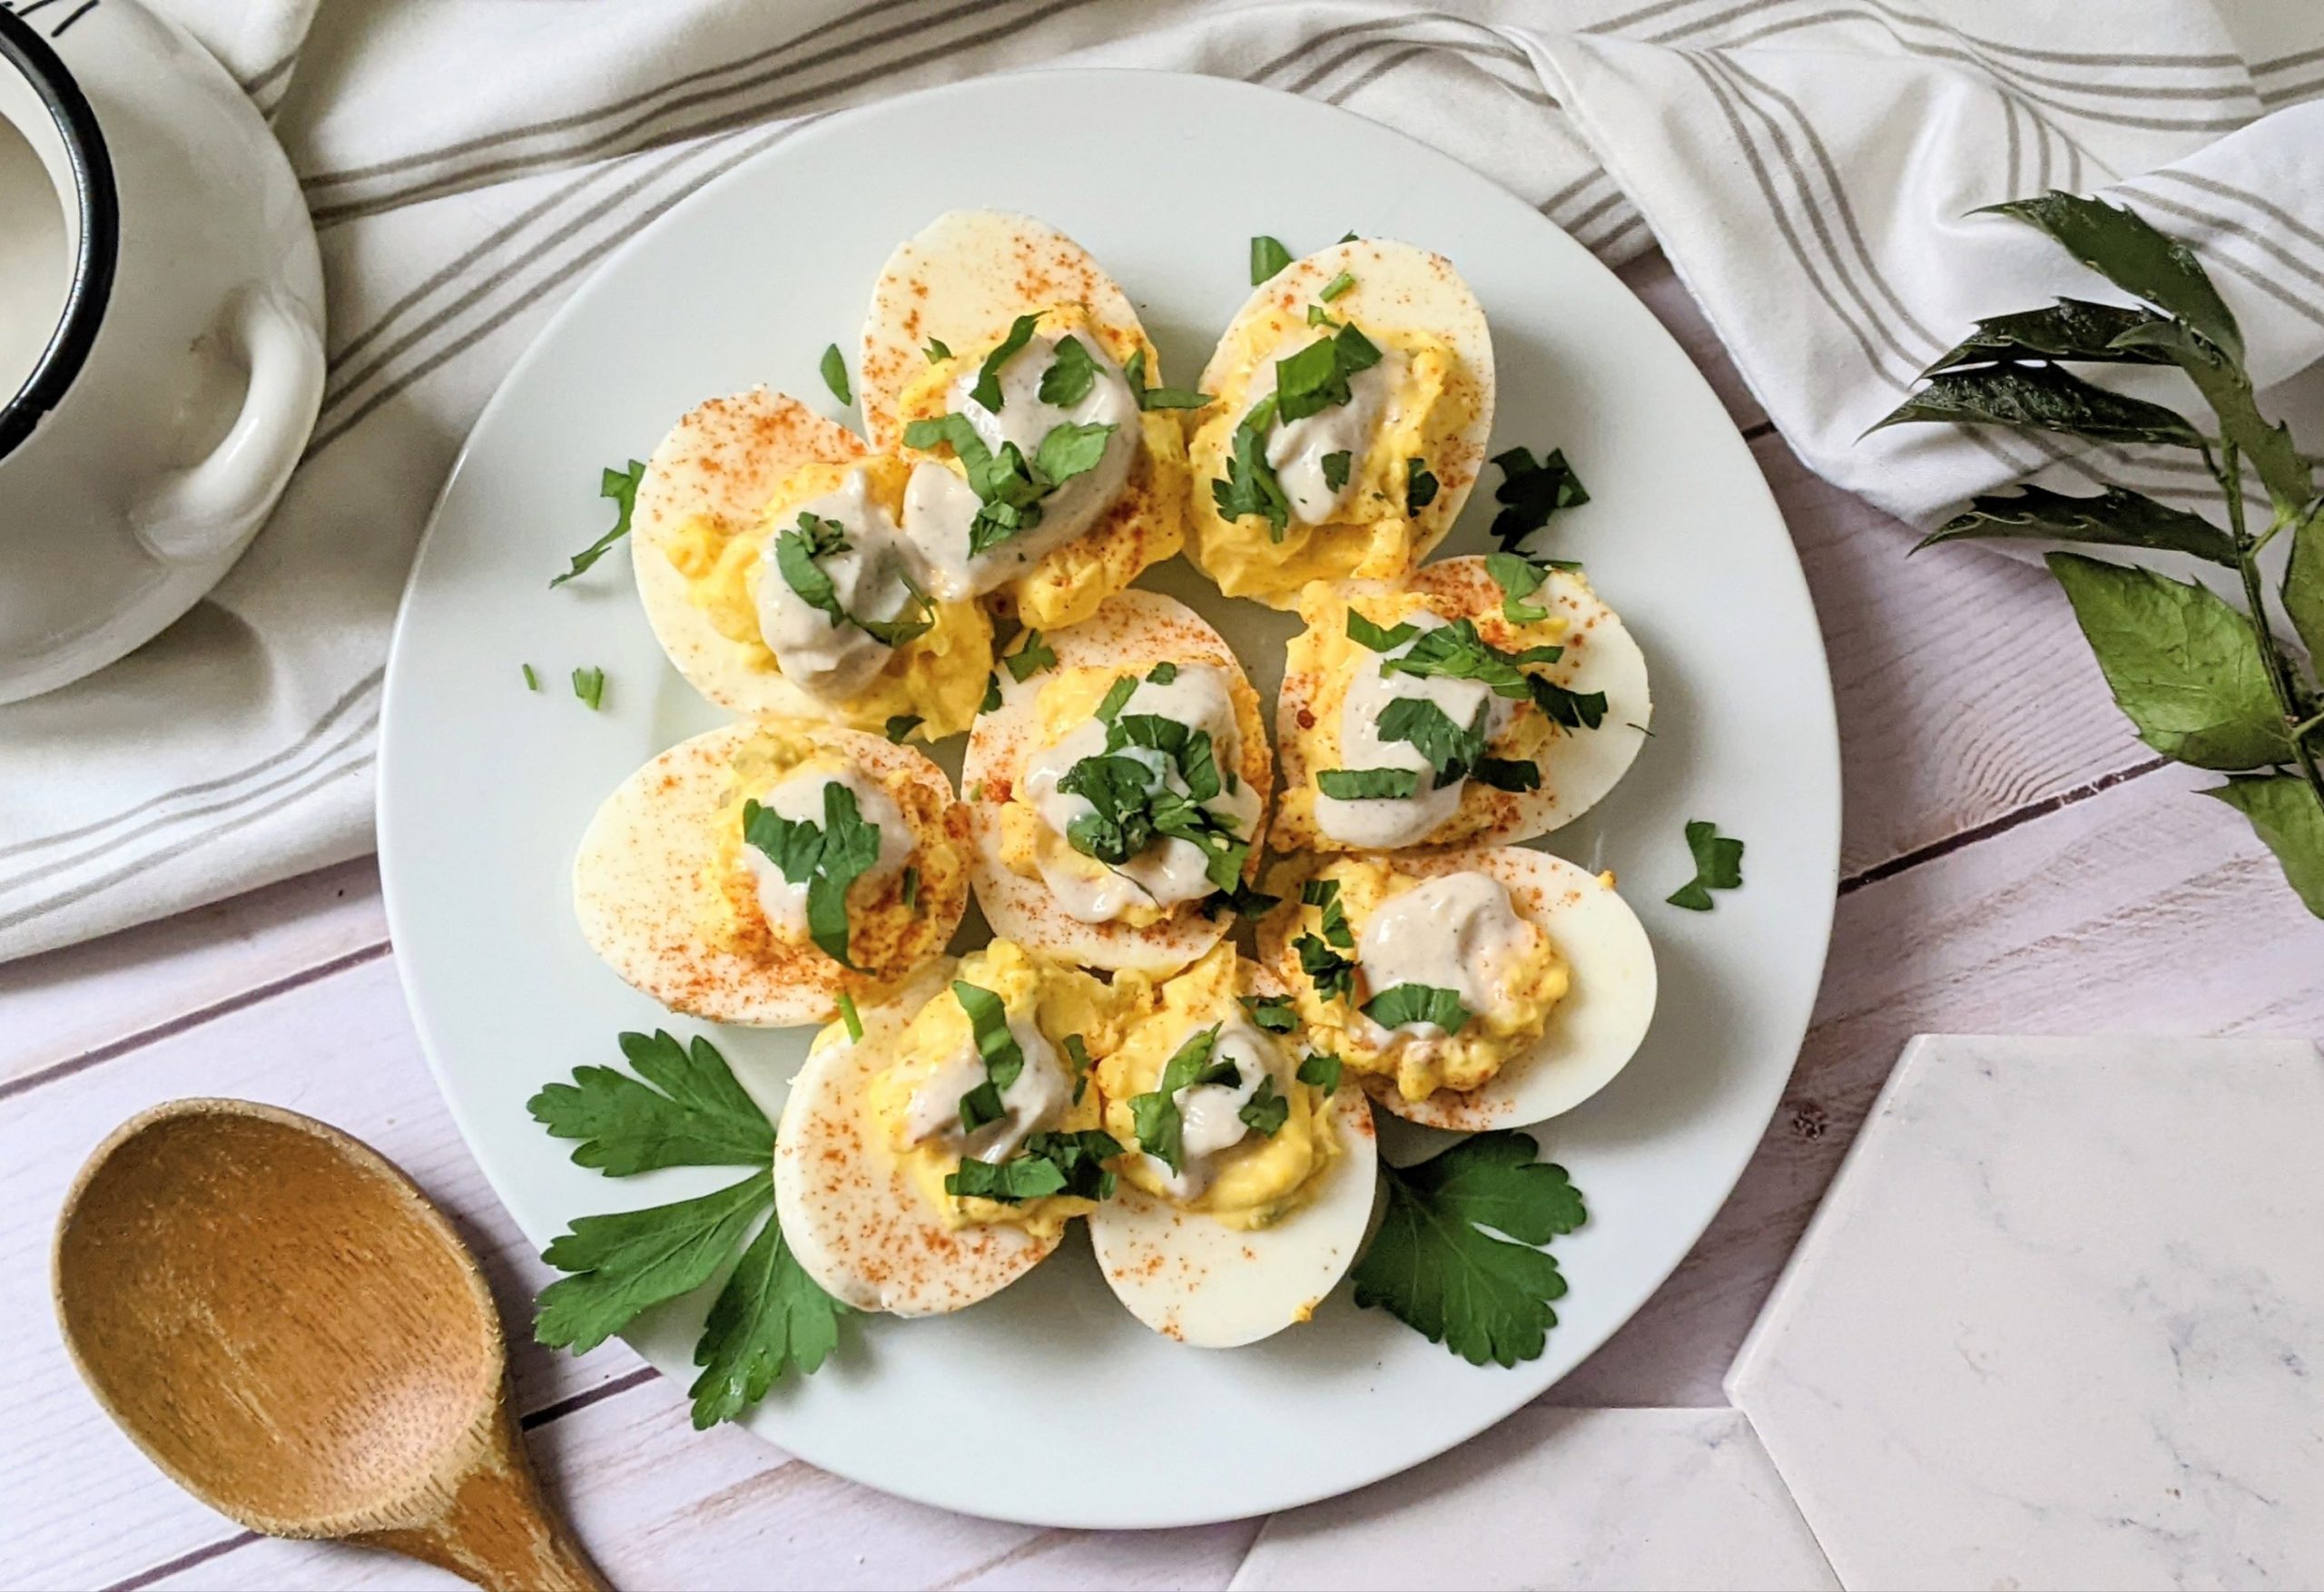 ranch dressing deviled eggs with salad dressing no mayo deviled egg filling without mayonnaise recipes vegetarian holiday appetizers